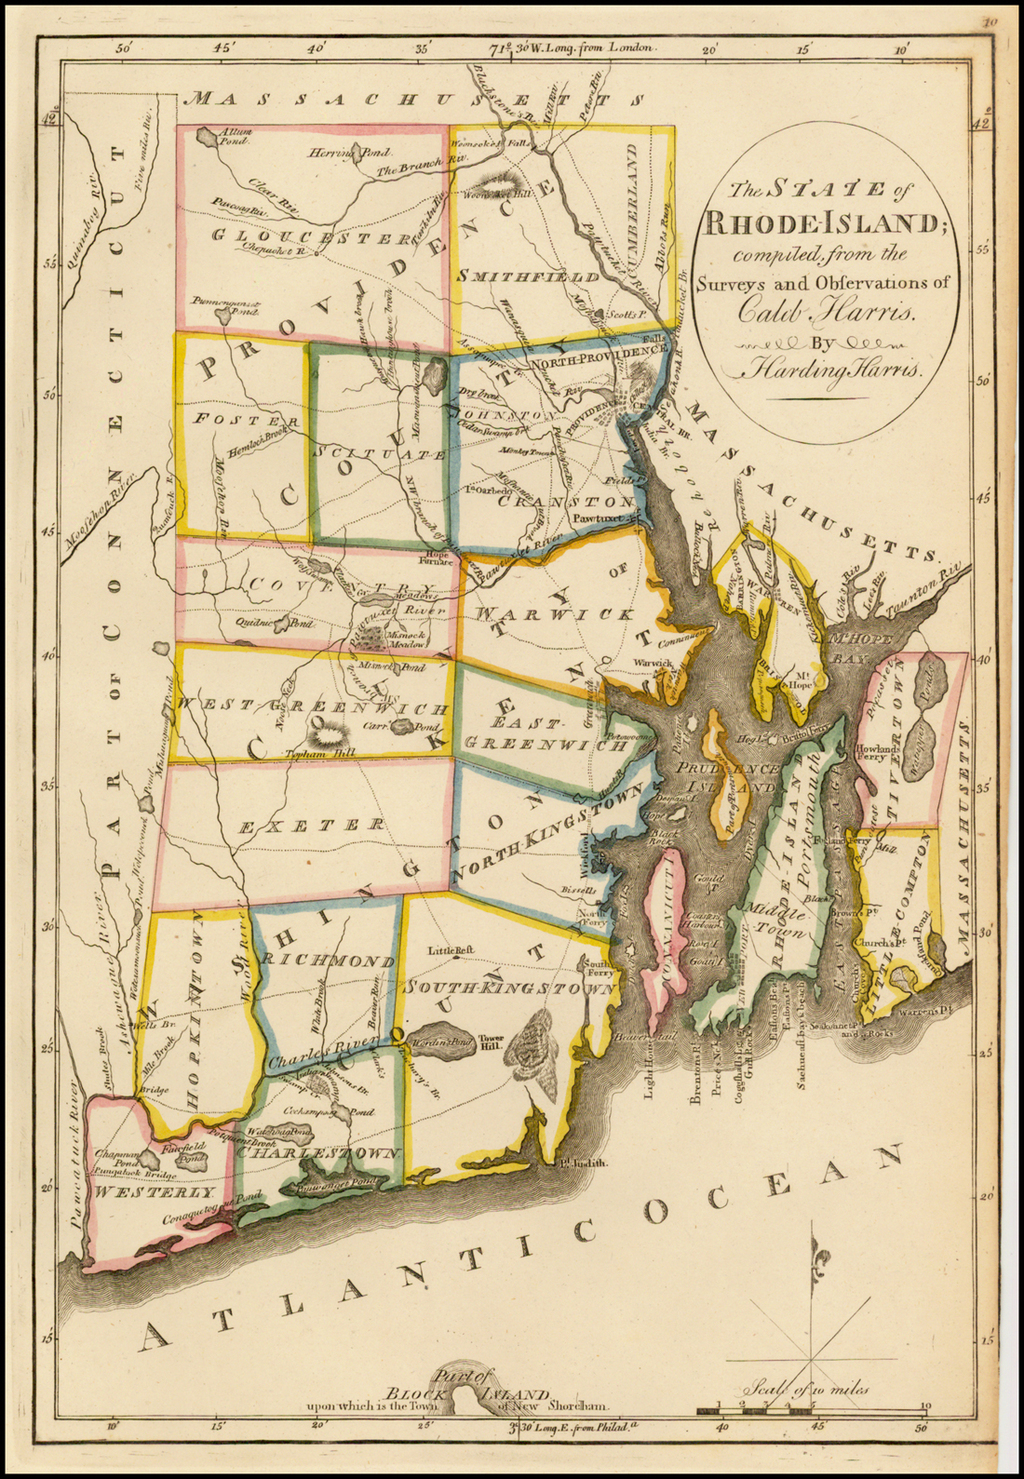 the-state-of-rhode-island-compiled-from-the-surveys-and-observations-of